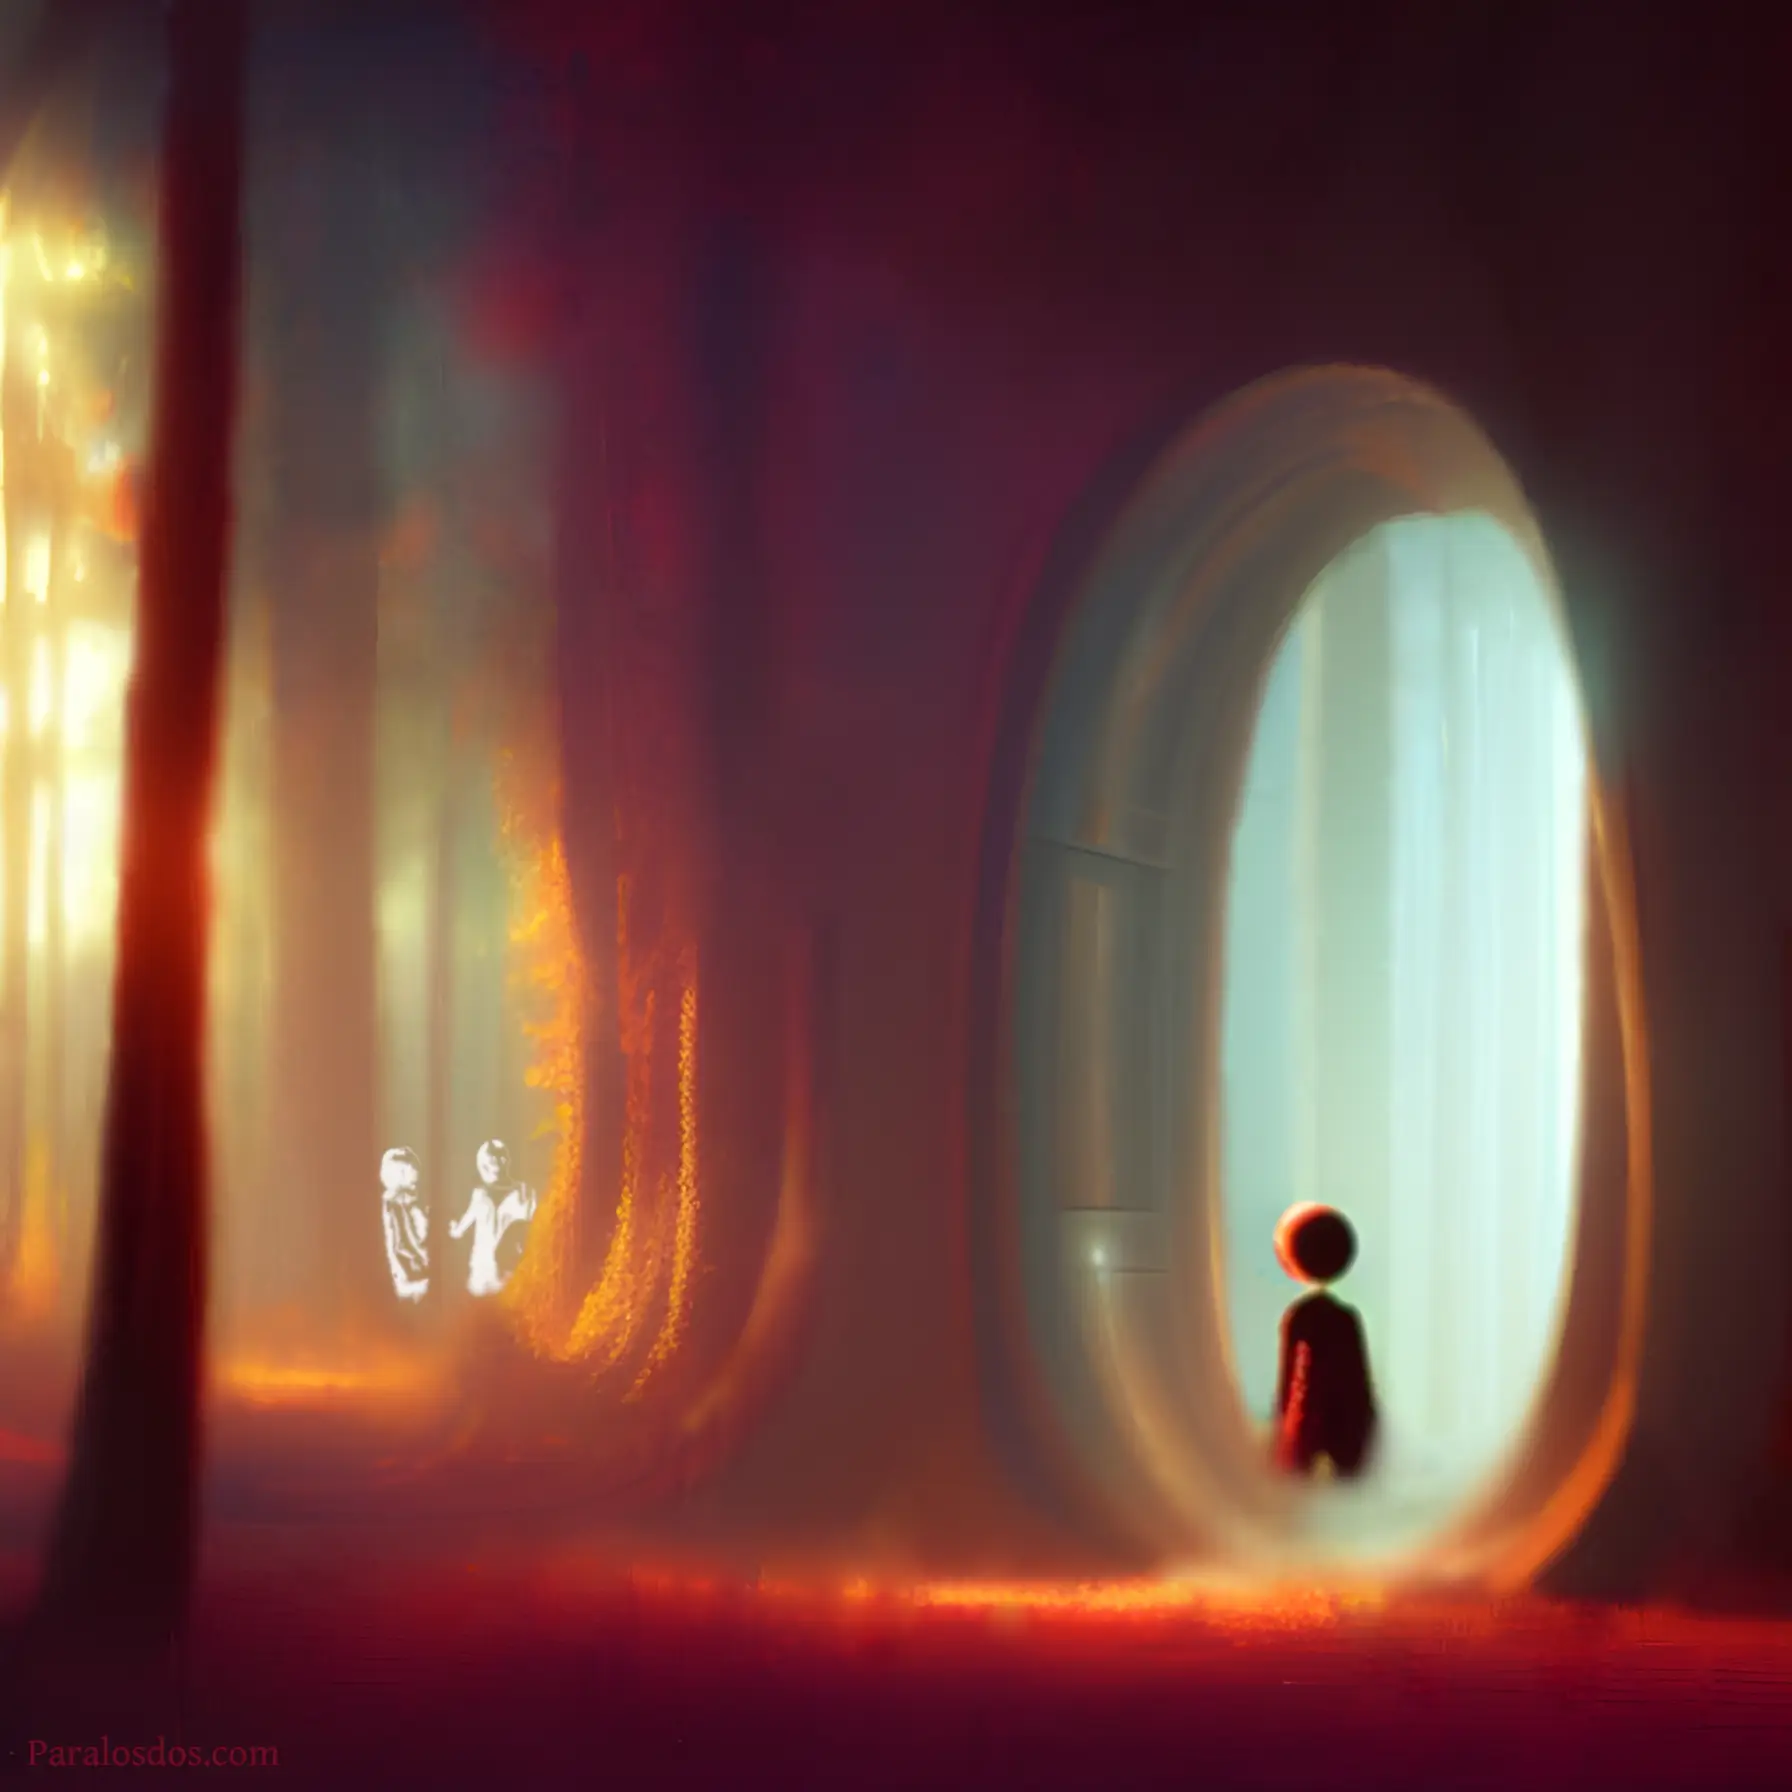 An artistic rendering of a figure moving into a portal in a forest that leads to another dimension.